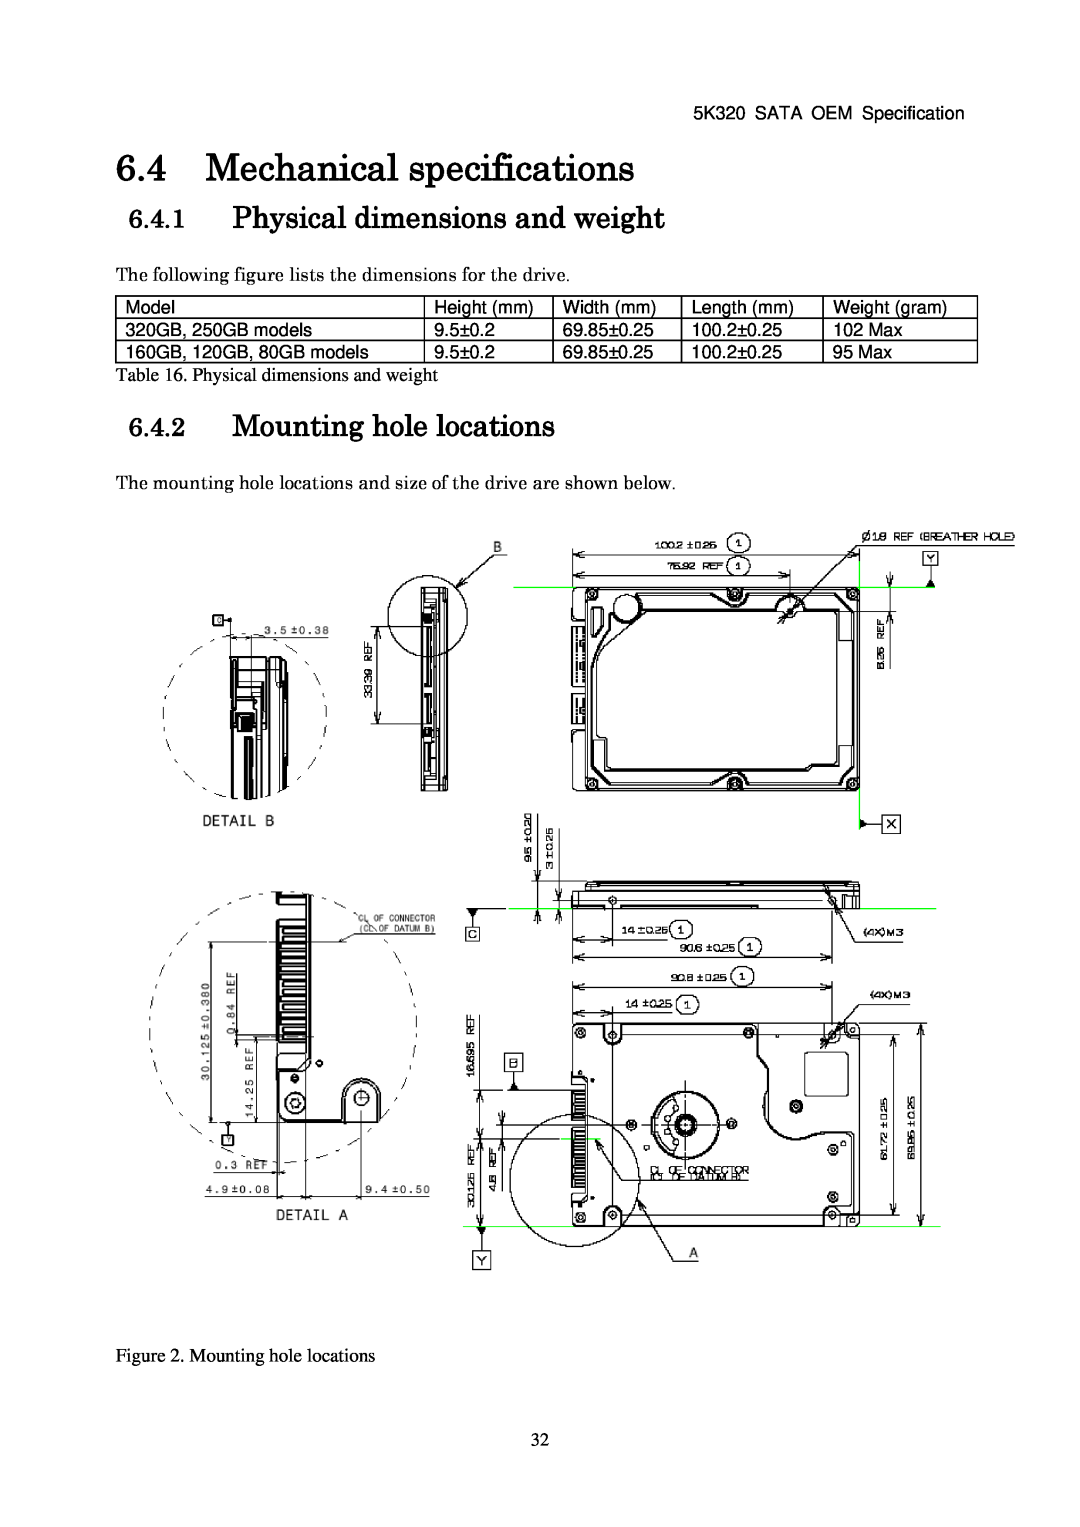 Hitachi HTS543225L9A300 6.4Mechanical specifications, 6.4.1Physical dimensions and weight, 6.4.2Mounting hole locations 